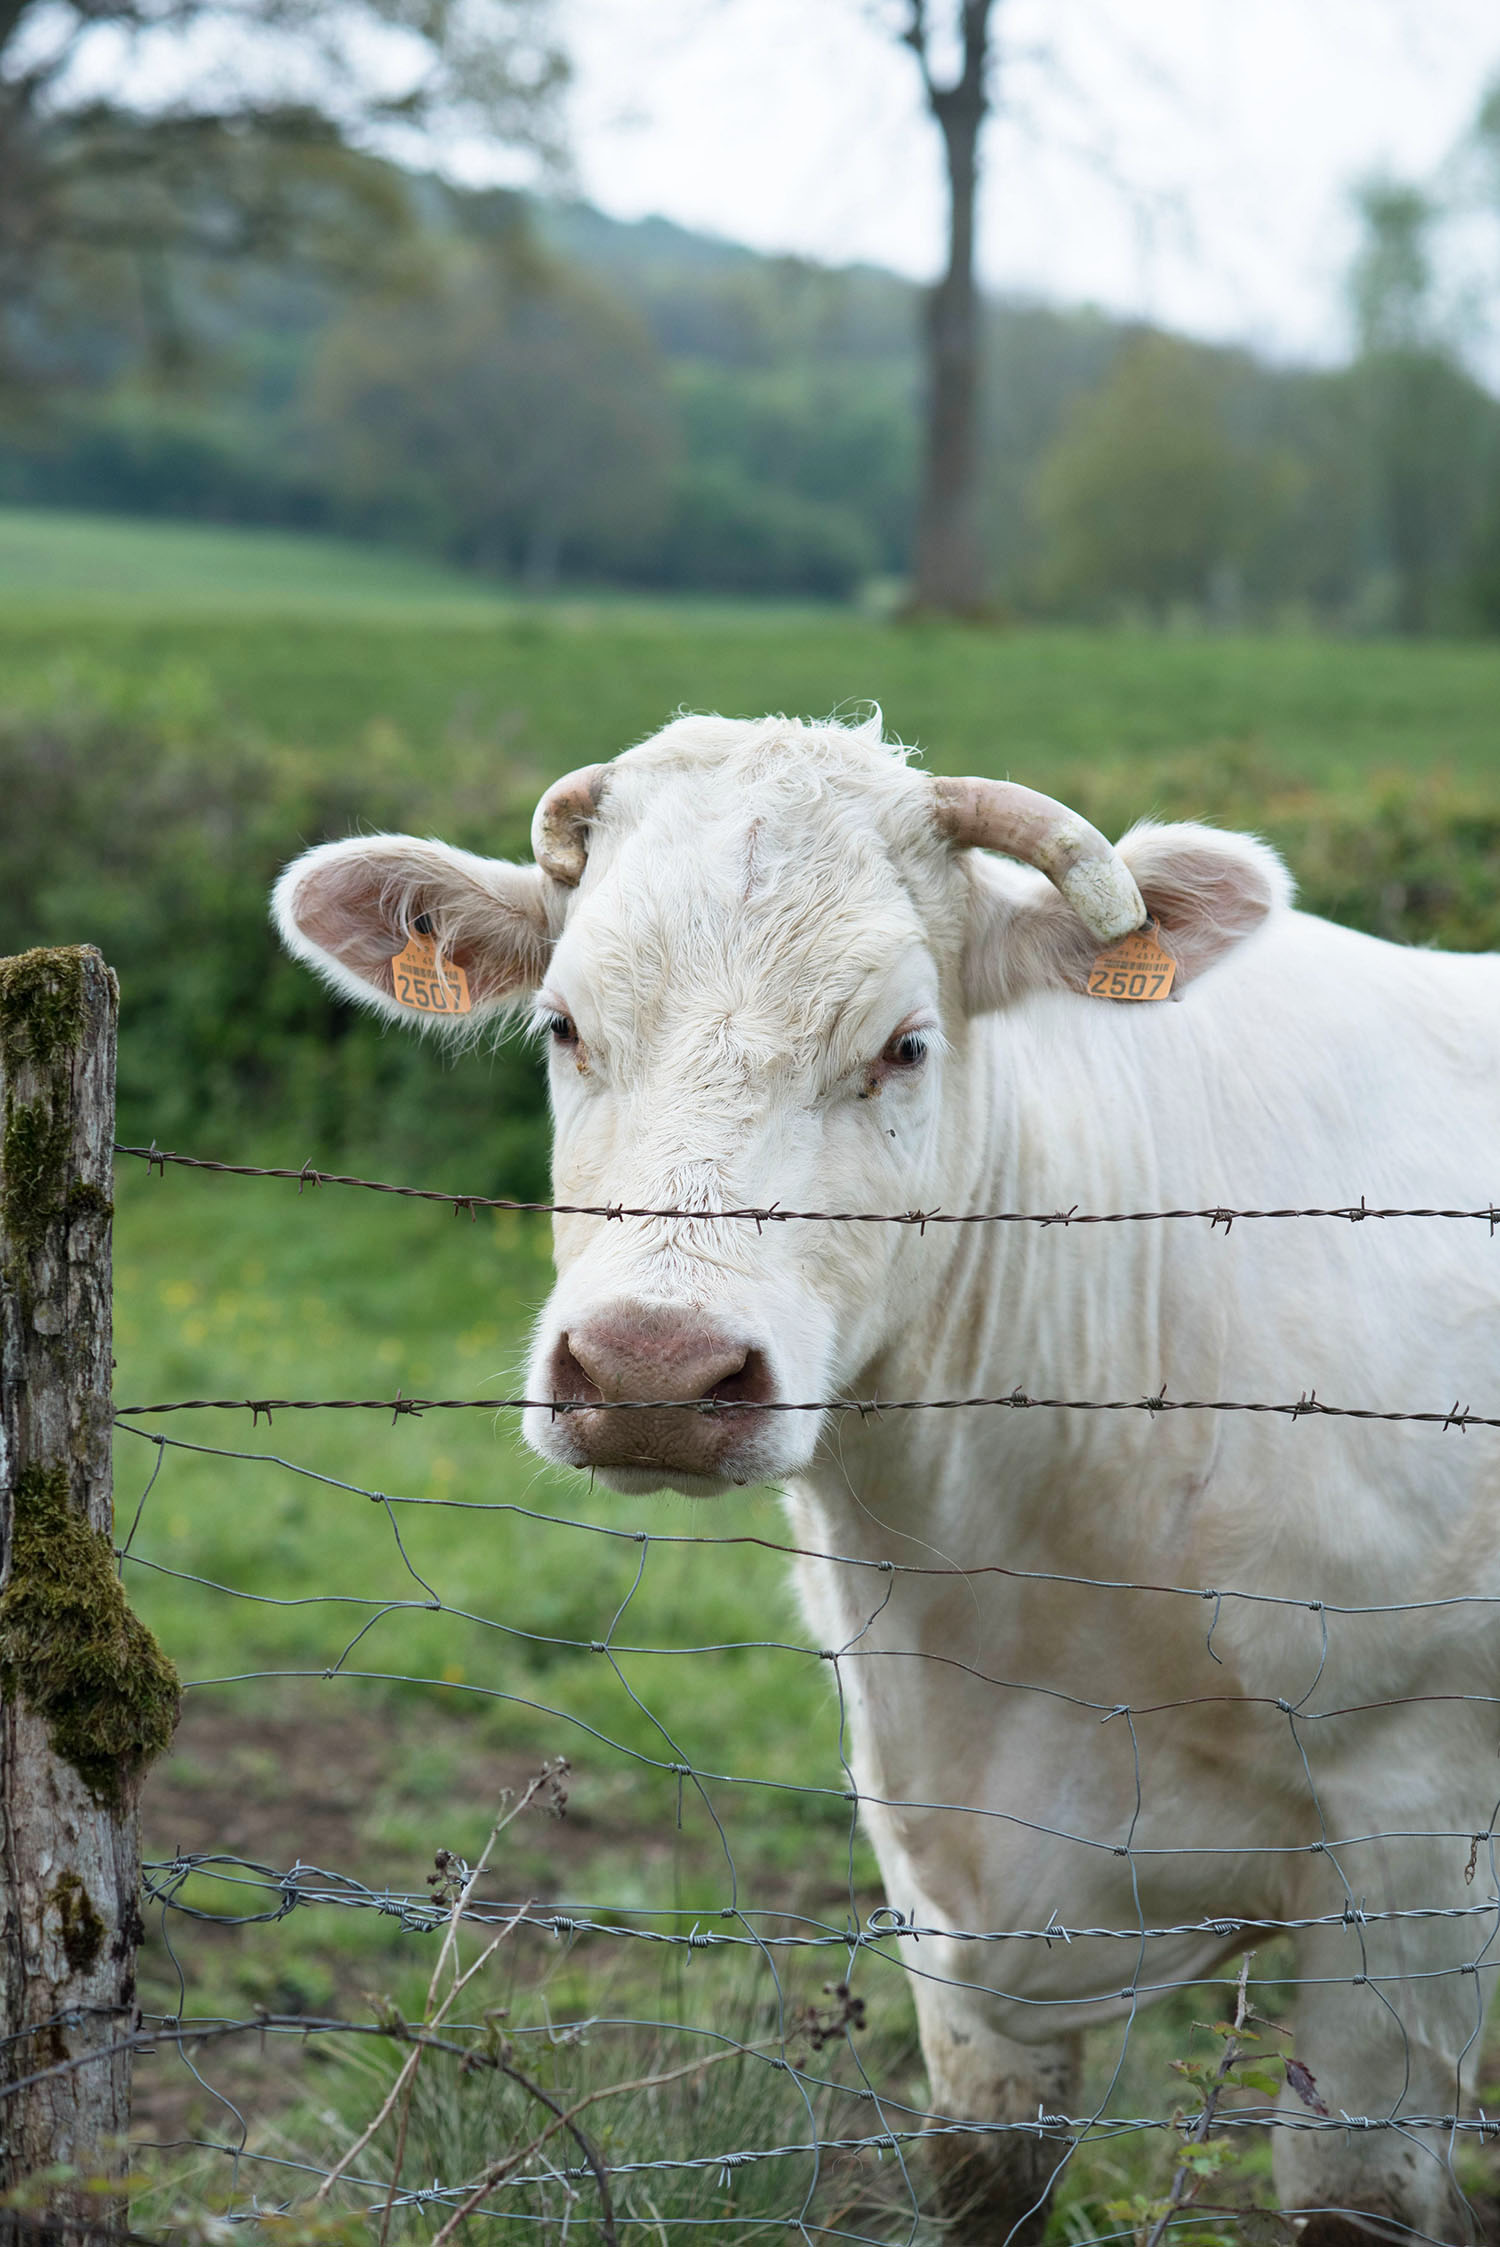 A white cow behind a fence in the Burgundy region of France, as captured by Winnipeg travel blogger Cee Fardoe of Coco & Vera